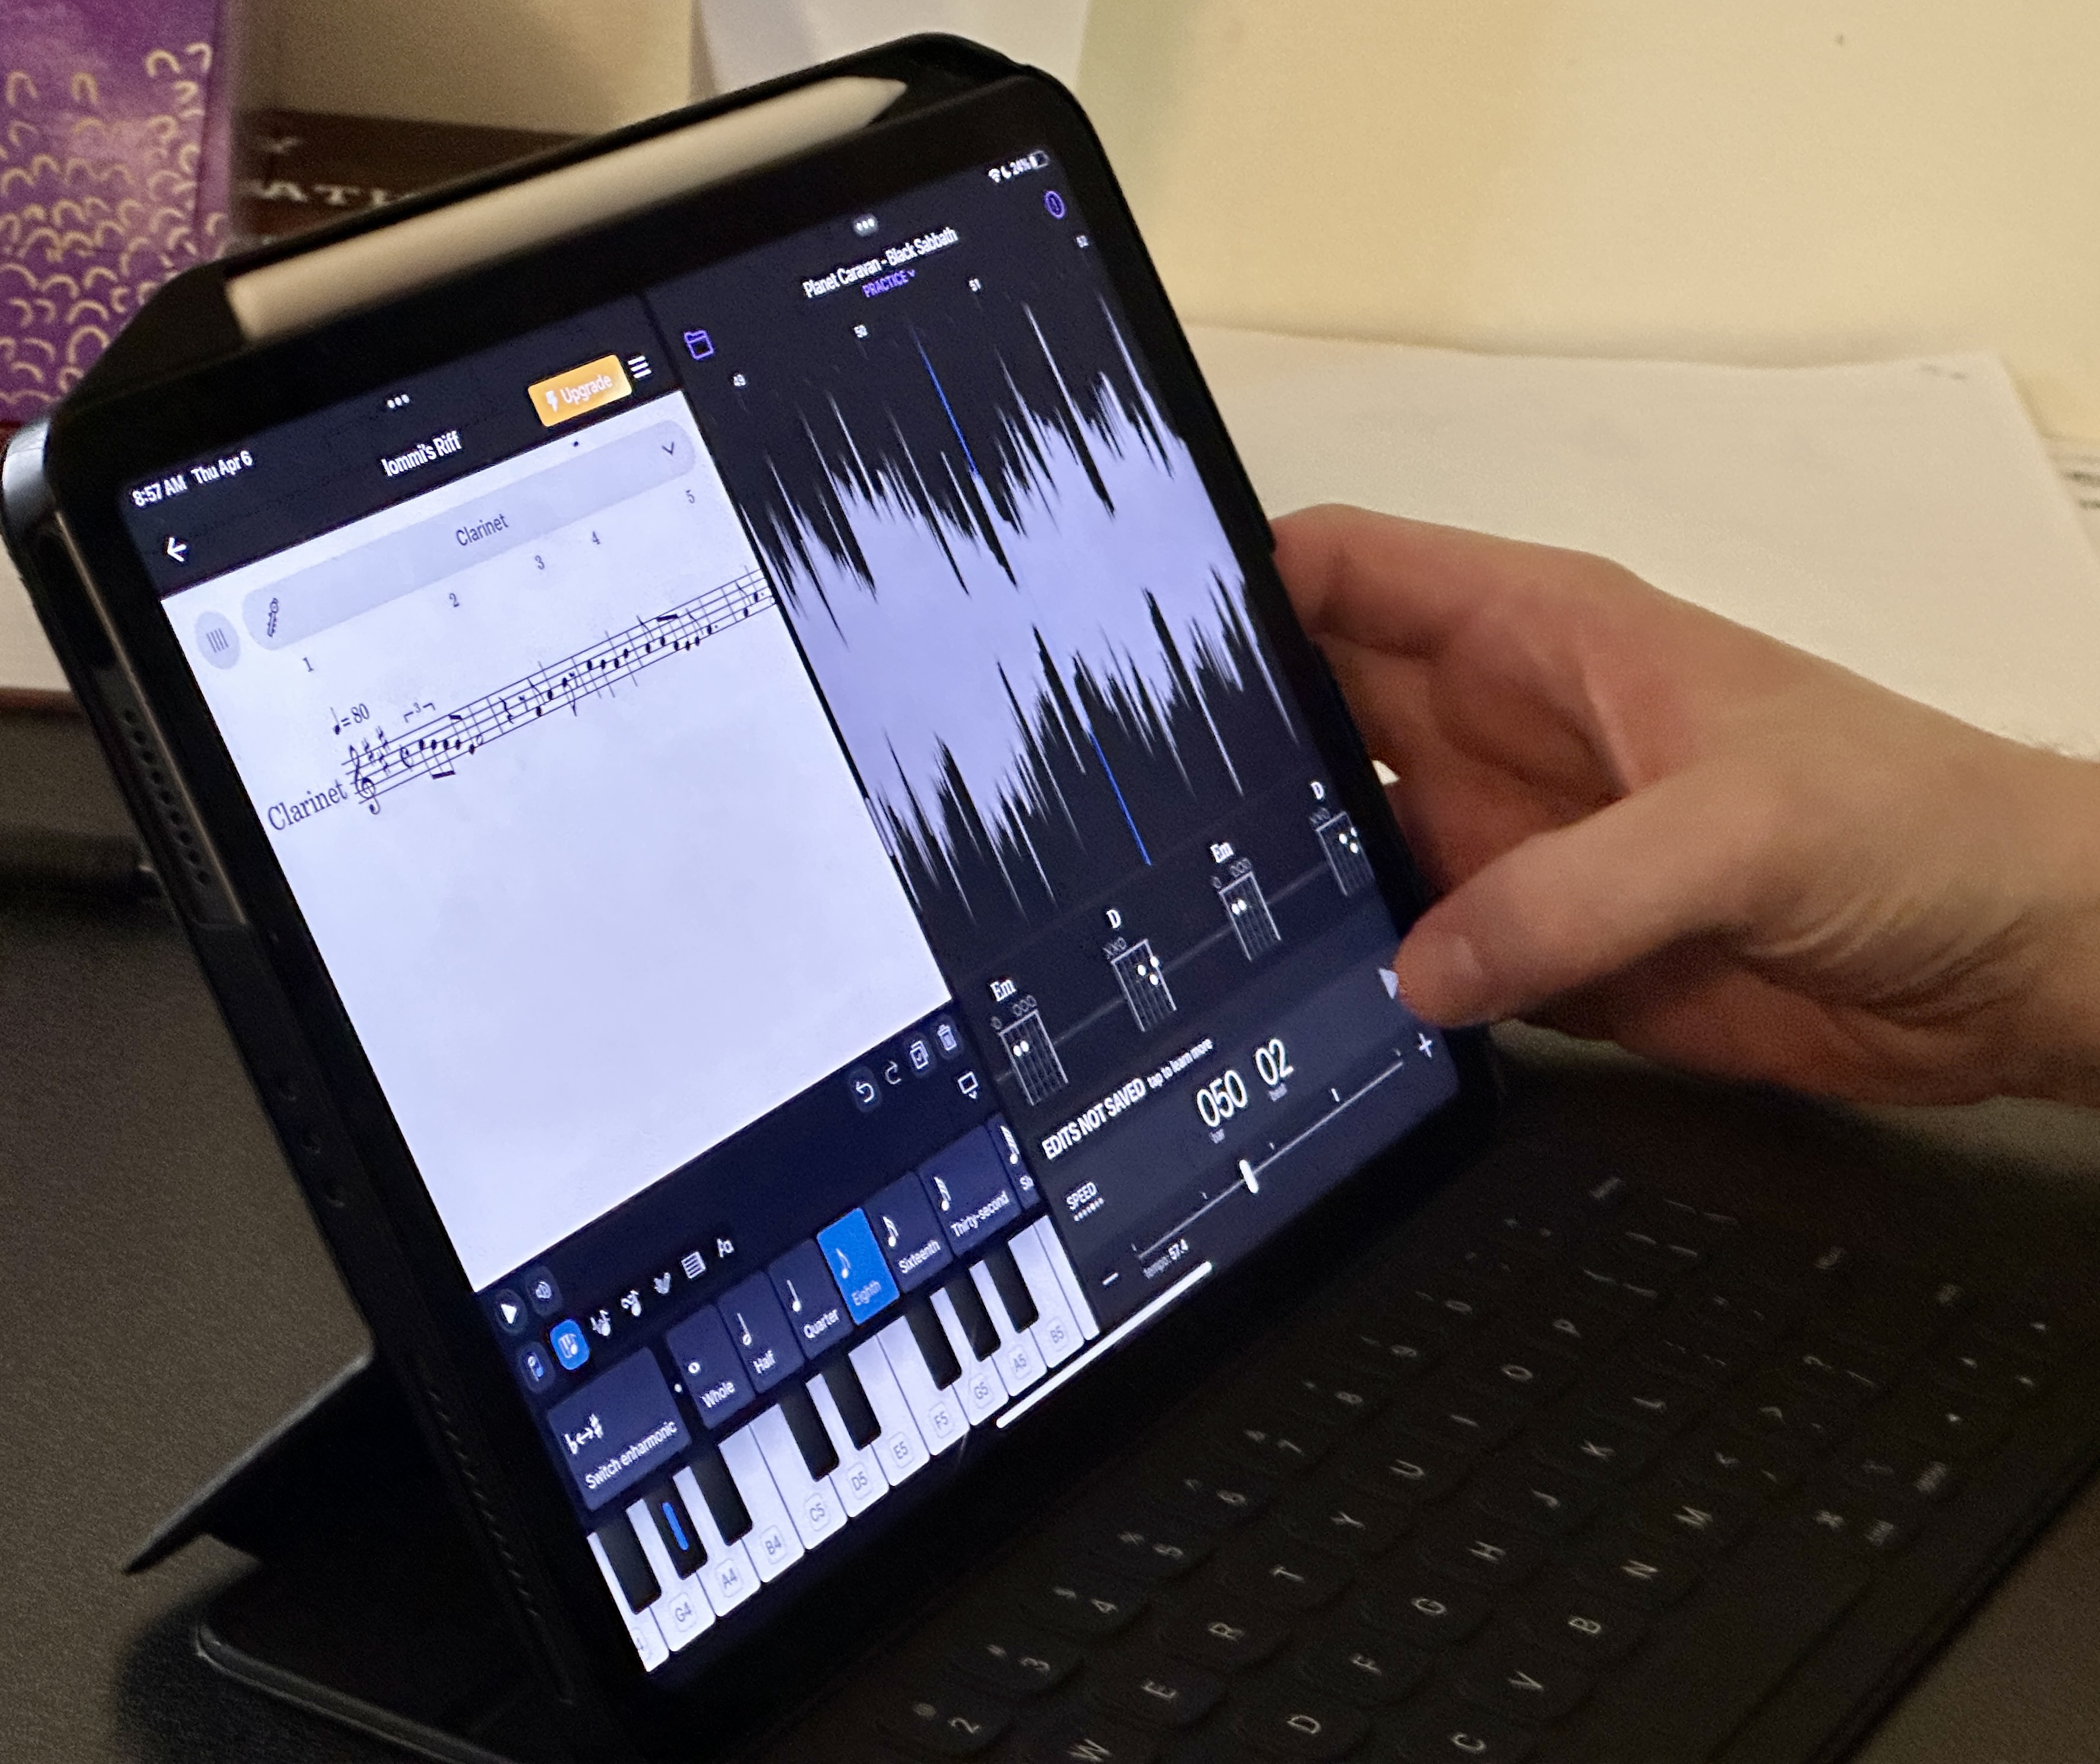 iPad using Split Screen to access music apps (Capo and Flat.io)